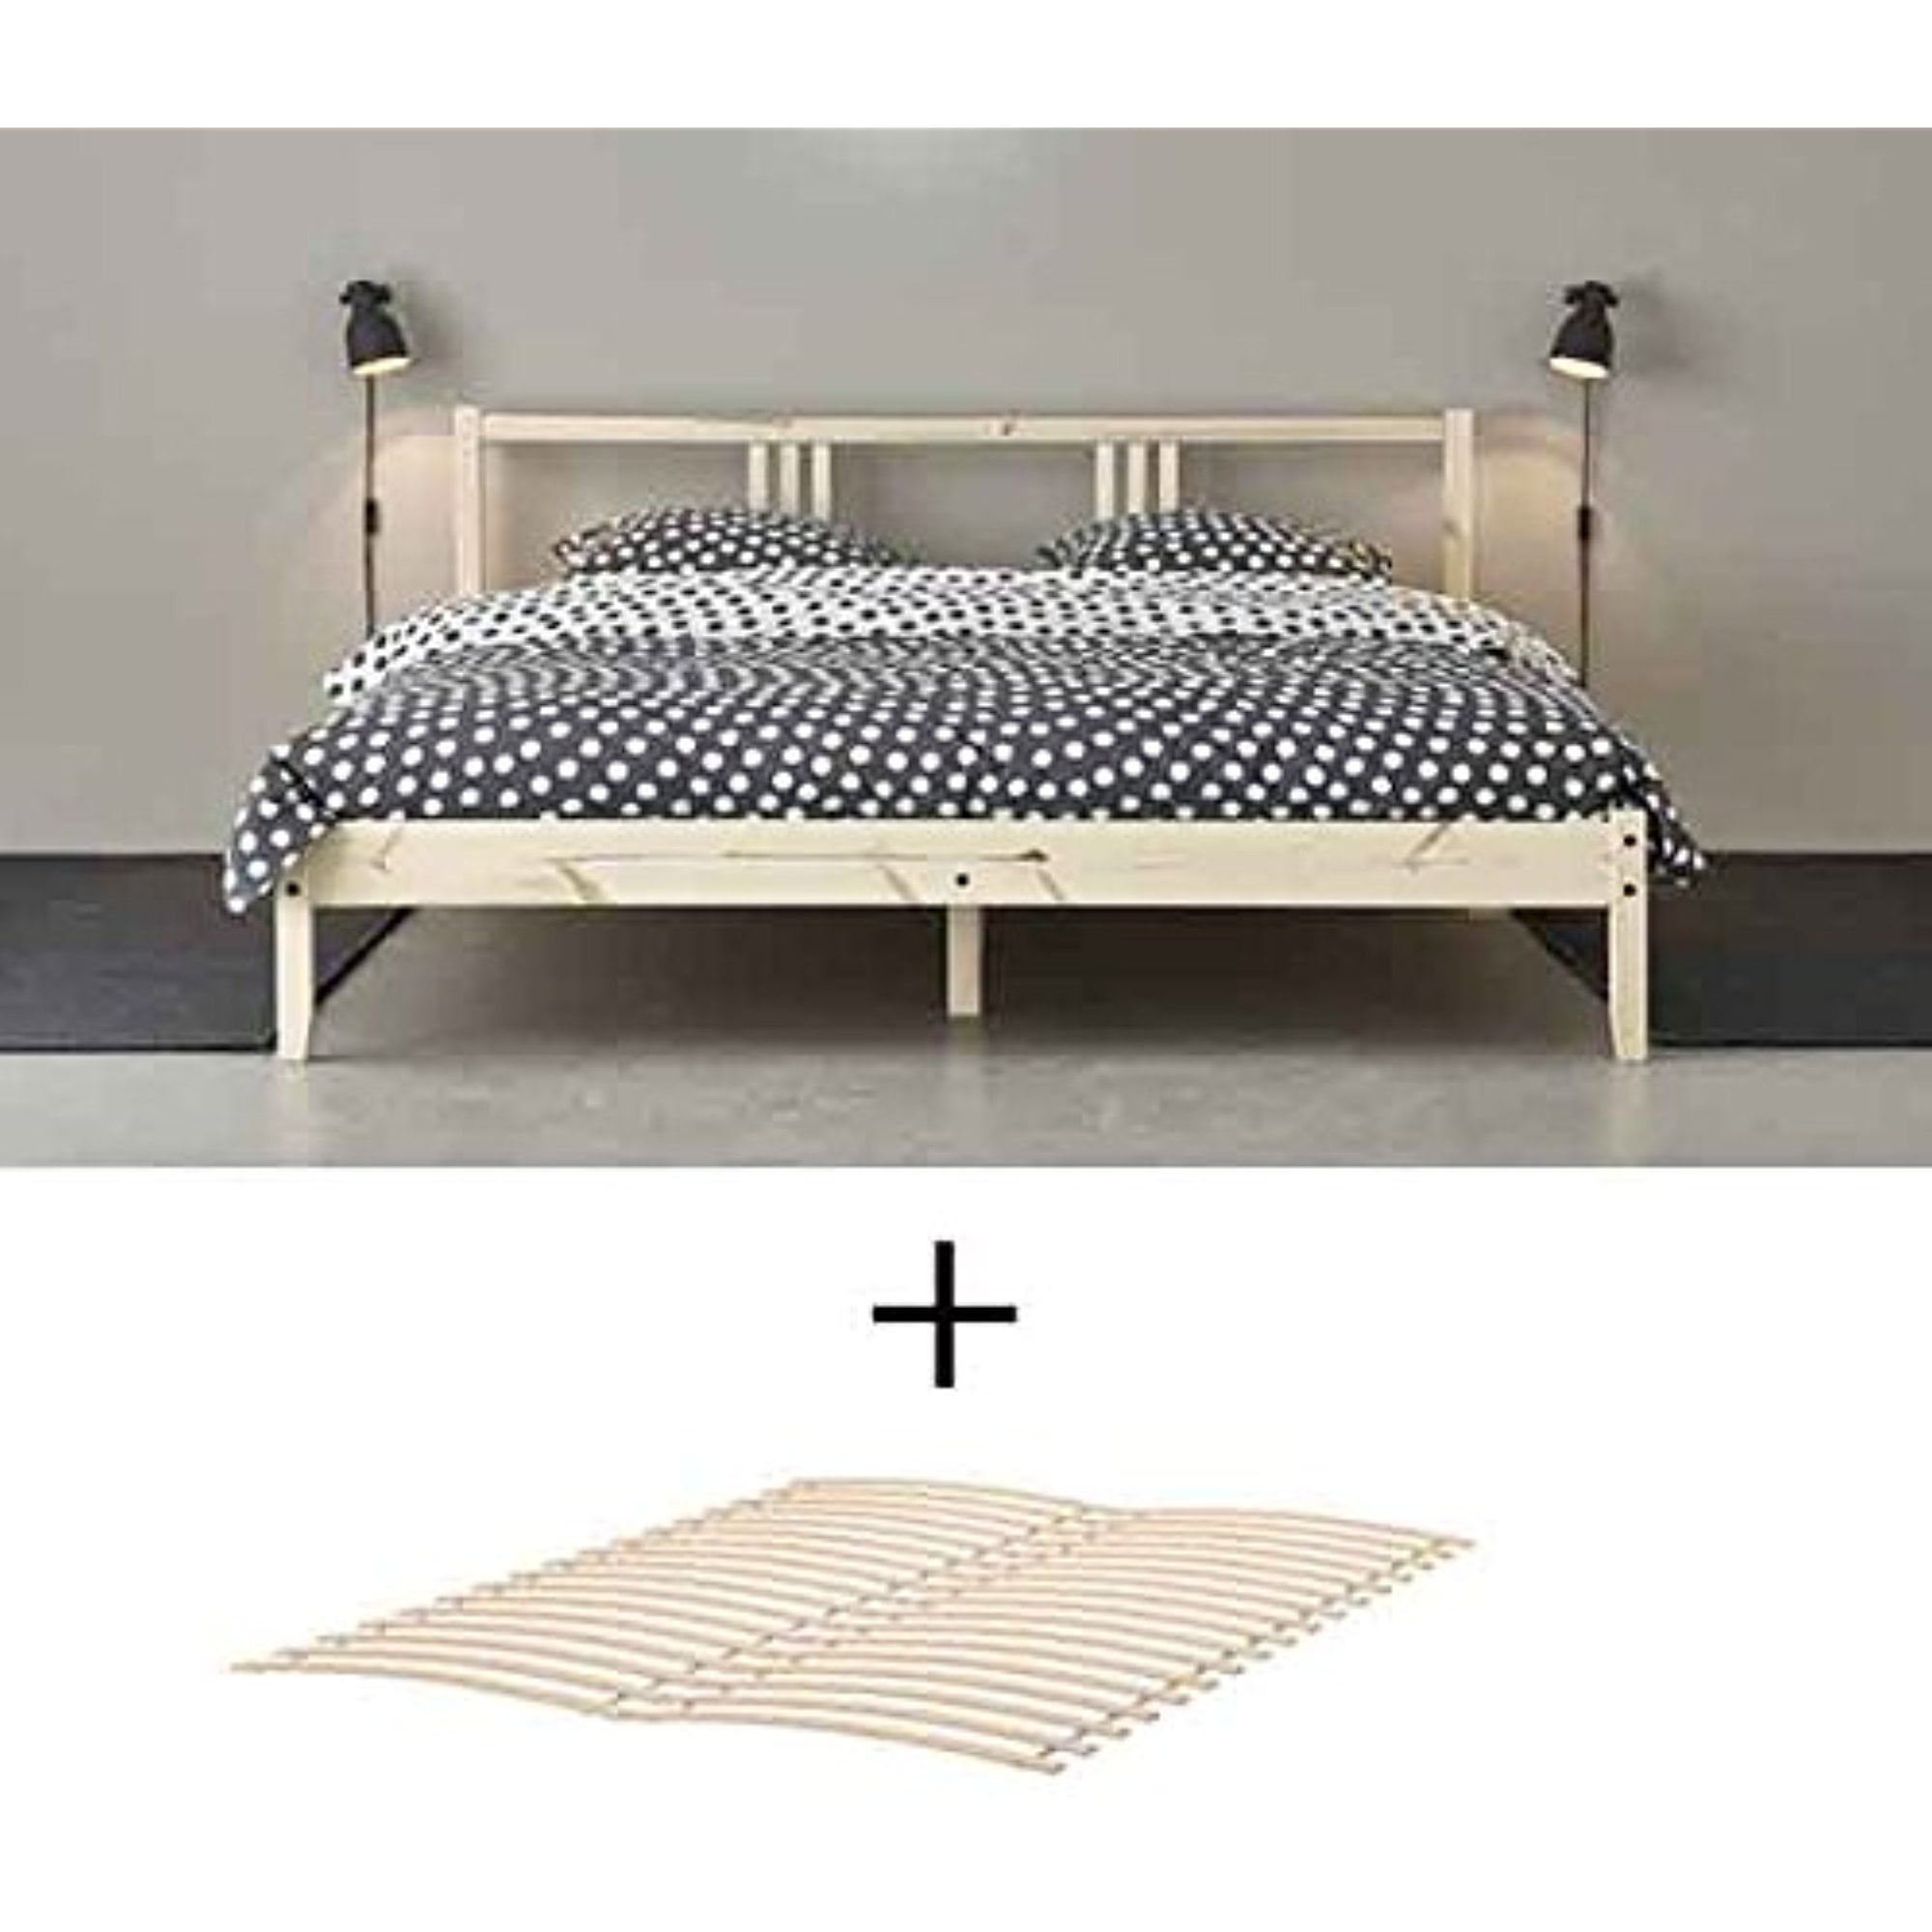 Ikea Wood Full Double Bed Frame with Slatted Base , Natural Birch Color